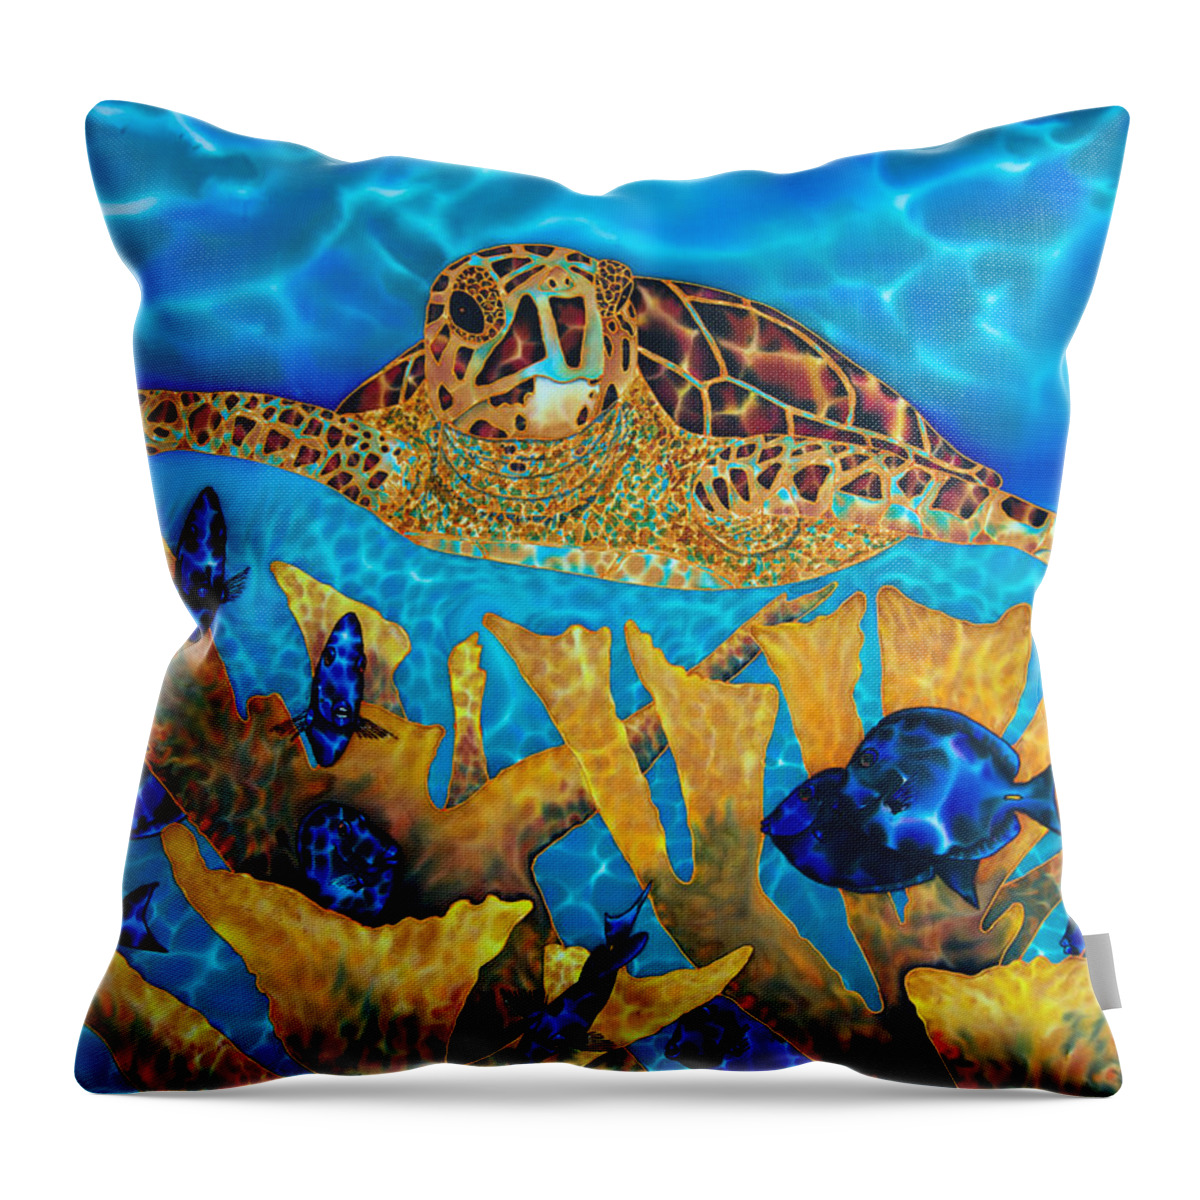 Sea Turtle Throw Pillow featuring the painting Hawksbill Sea Turtle by Daniel Jean-Baptiste